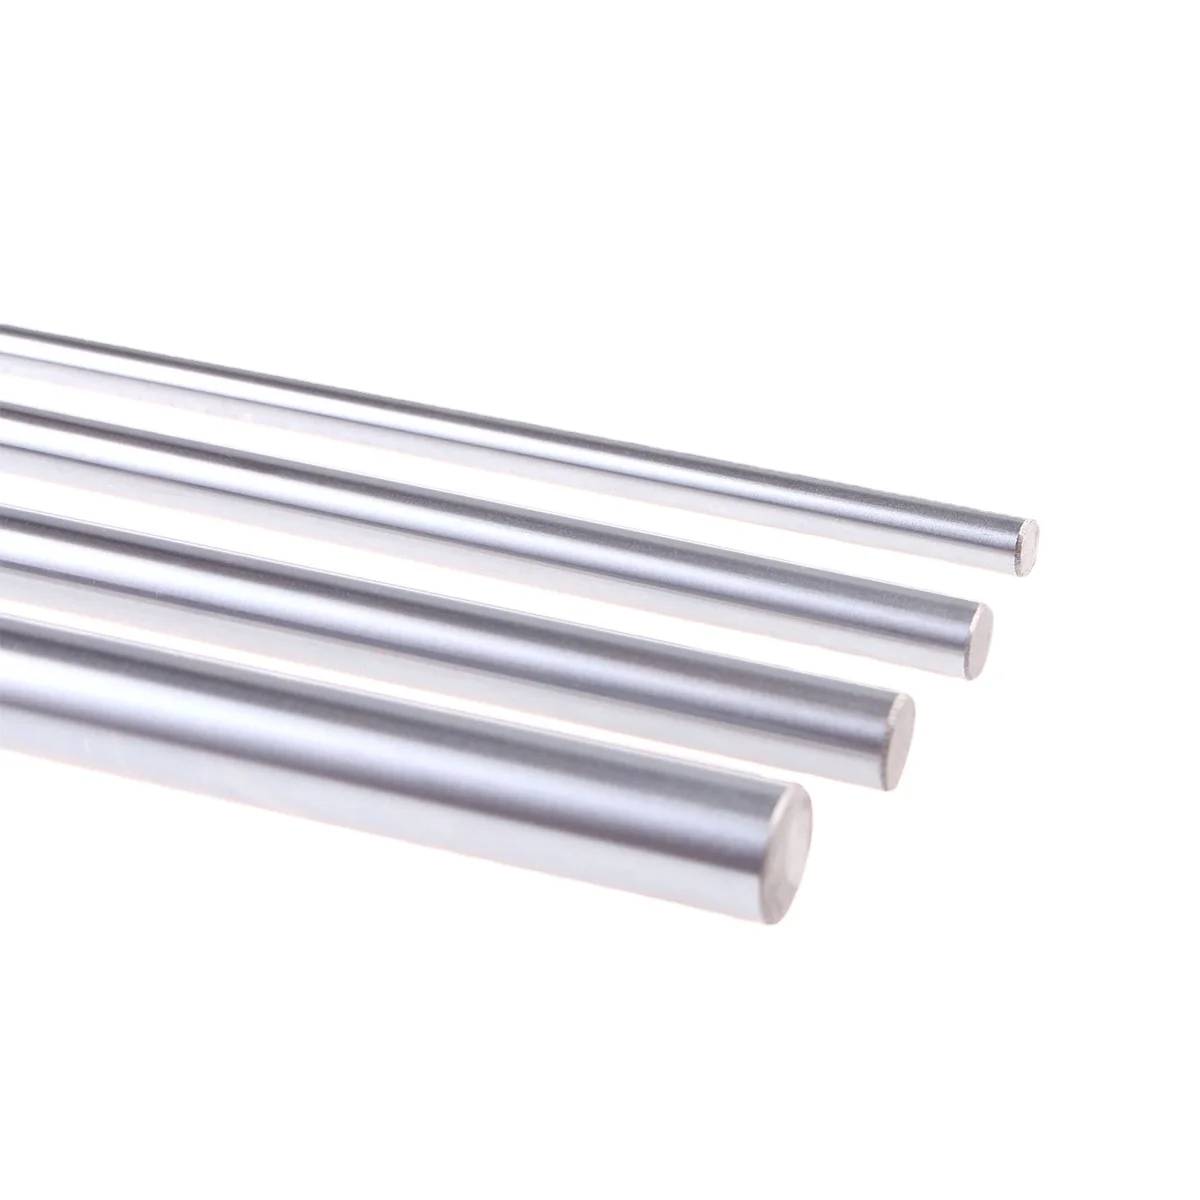 2pcs 6mm 8mm 10mm 12mm OD Linear Shaft Cylinder Rail Chrome Plated Round Smooth Rods Optical Axis for CNC 3D Printer Parts 1pc 6mm 8mm 10mm 12mm 16mm linear shaft rail 8mm 400mm cylinder chrome plated smooth linear rods axis 3d printer cnc part